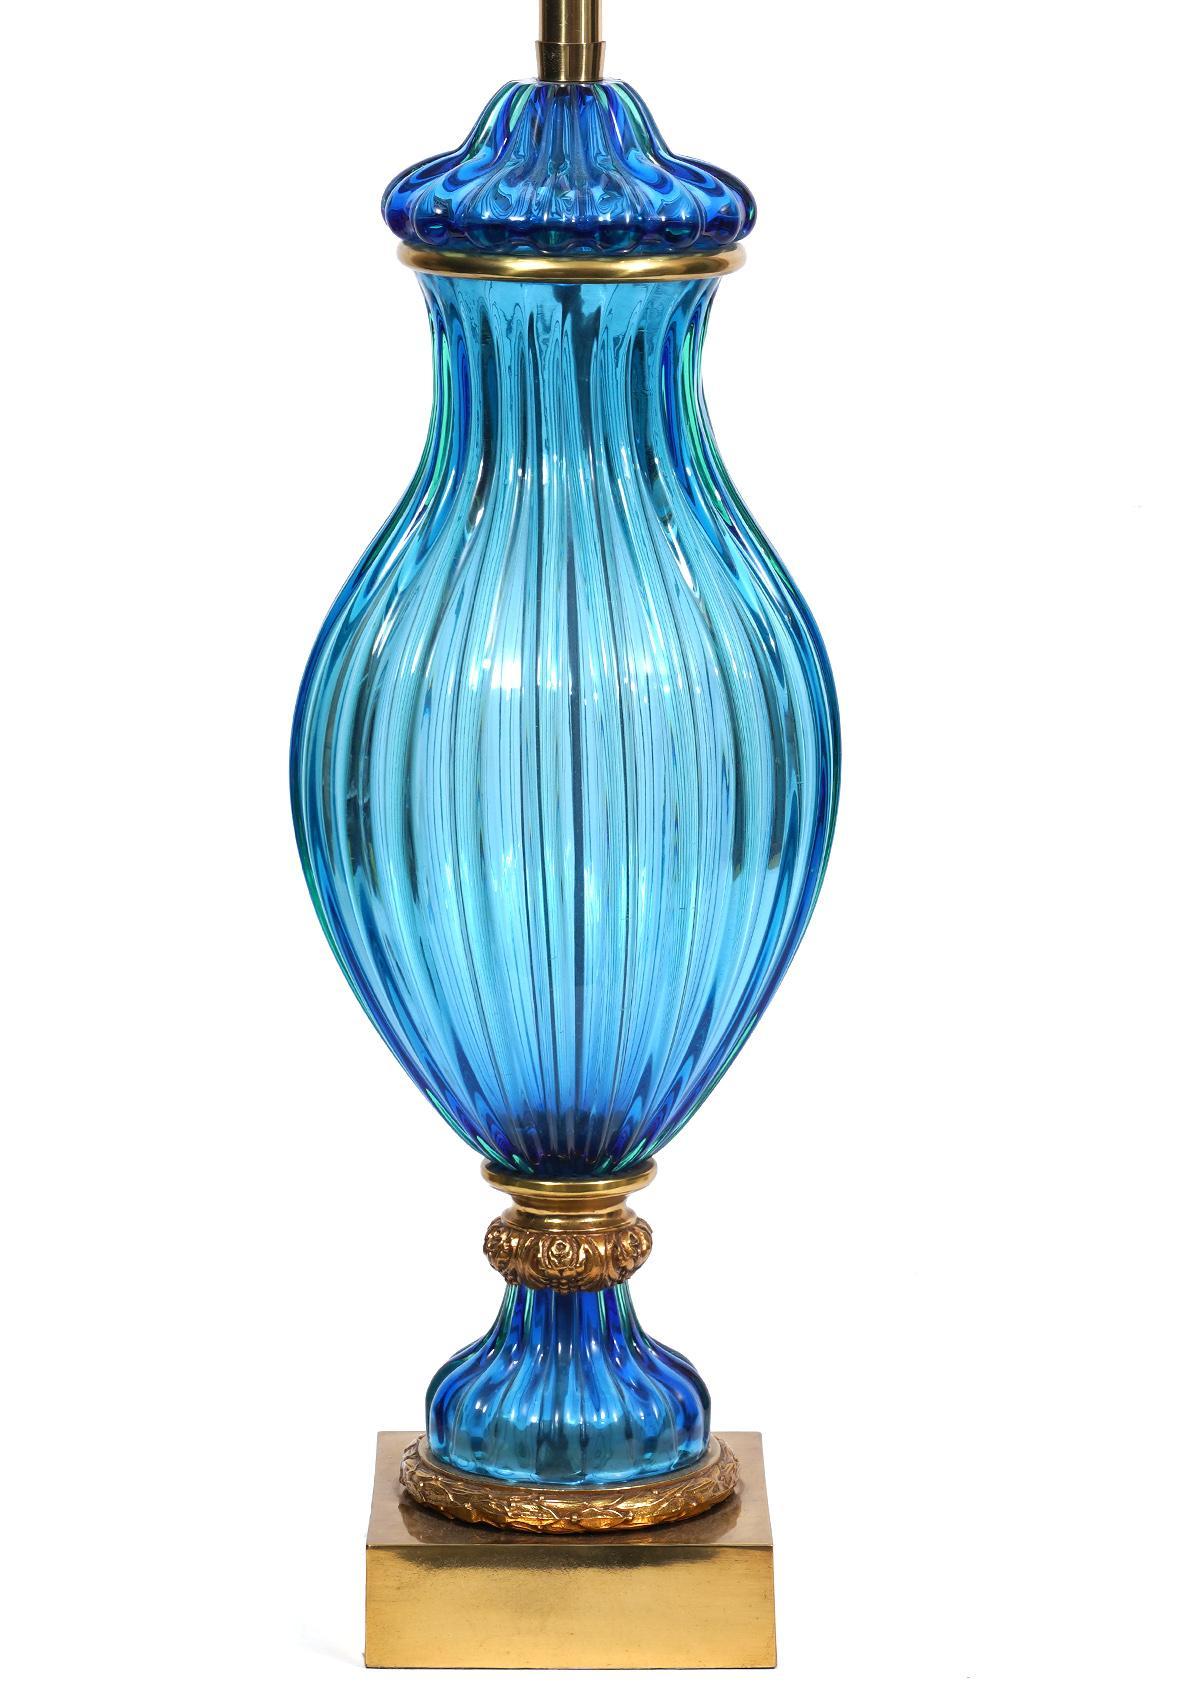 Pair of large blue fluted Murano glass lamps, attributed to Seguso (glass portion), manufactured by Marbro, USA, circa 1960s, signed. The lamps have polished brass hardware atop polished brass square bases. Both lamps feature the original Marbro